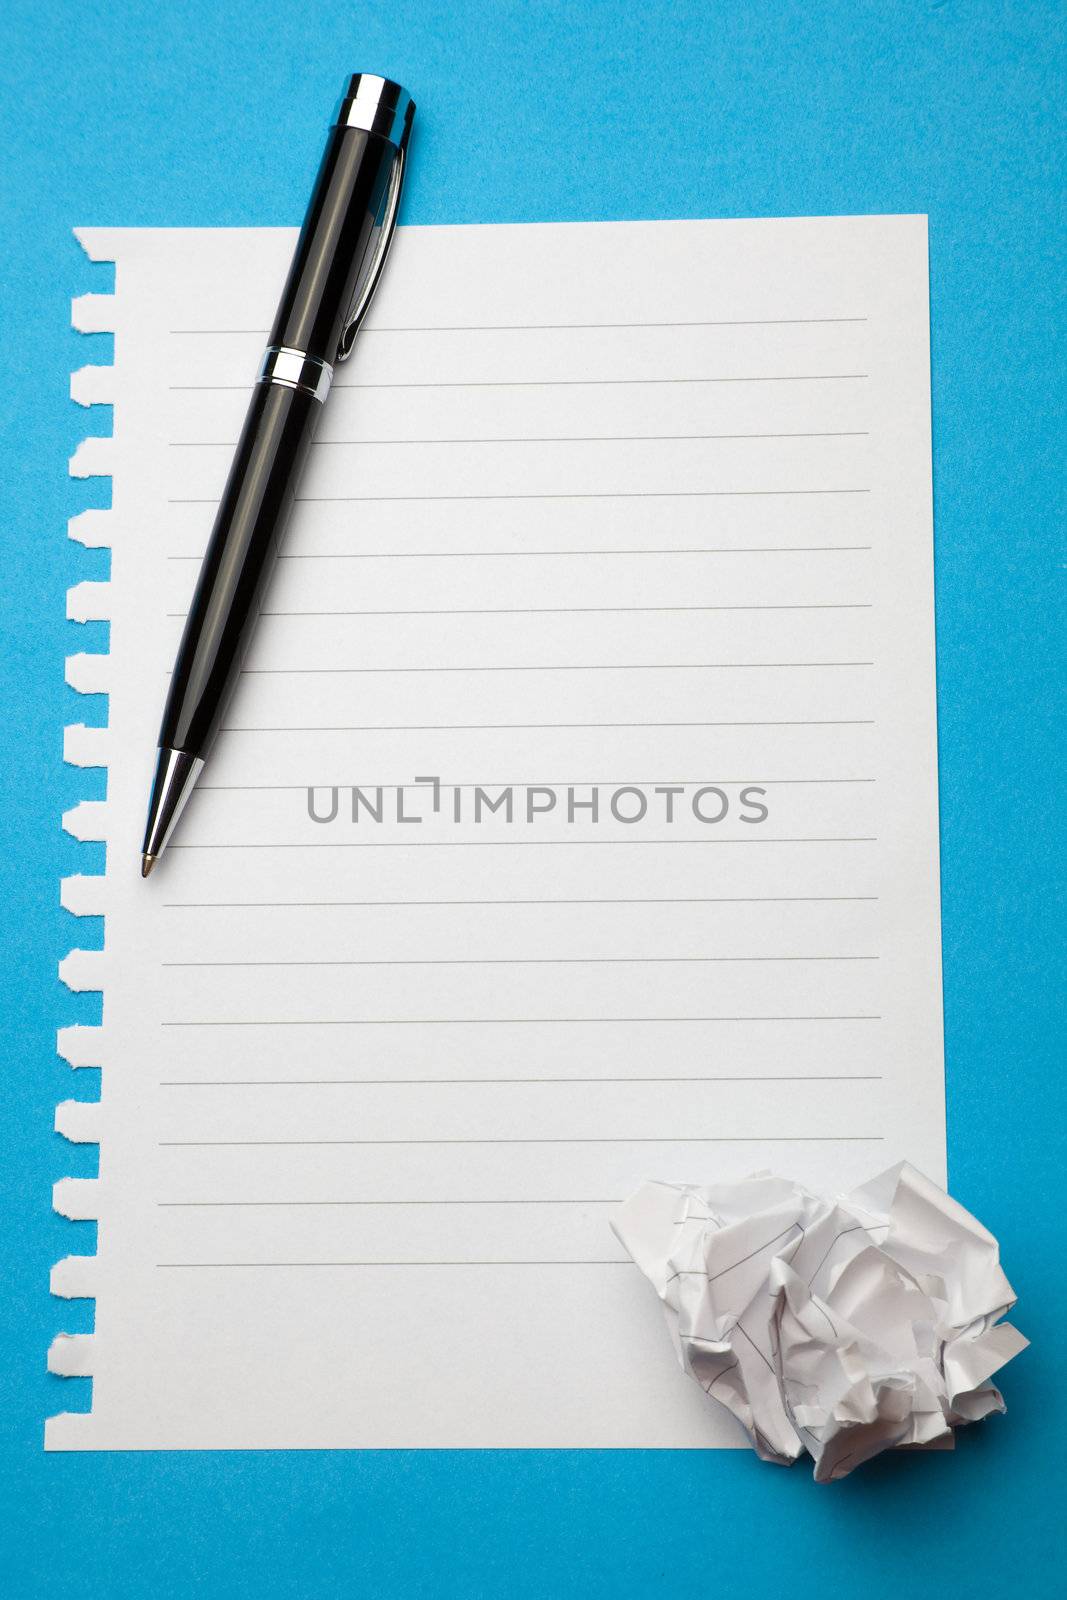 Clear paper ready for writing, pencil, background